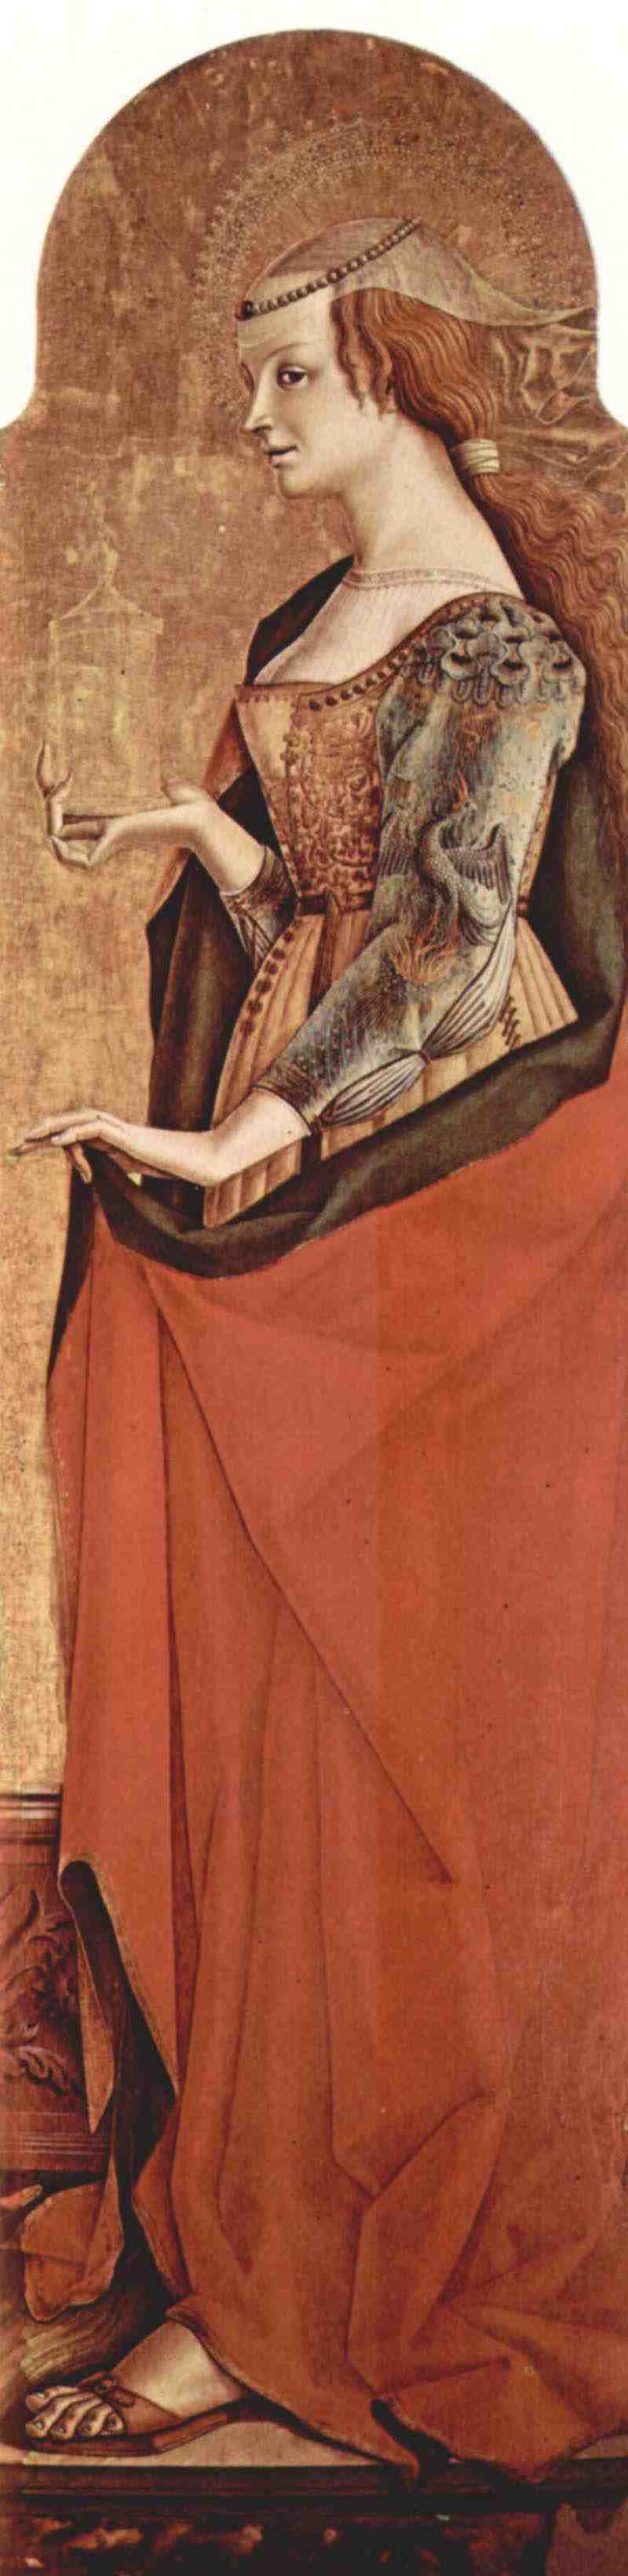 Altarpolyptychon of San Francesco at Montefiore dell 'Aso, right outer panel: St. Mary Magdalene. Carlo Crivelli